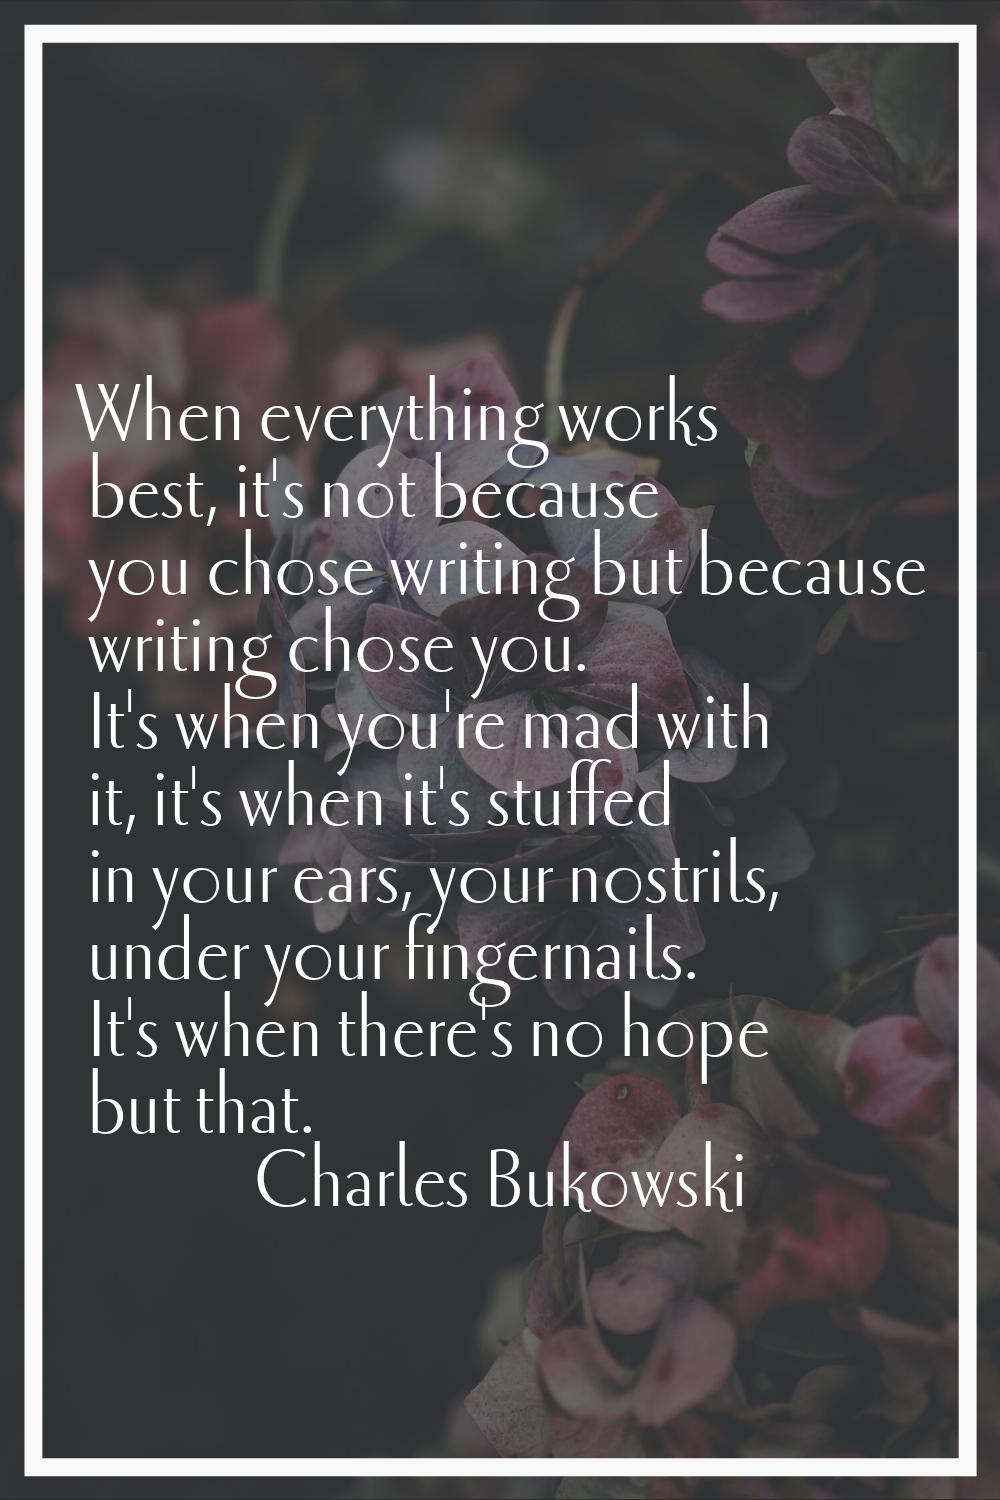 When everything works best, it's not because you chose writing but because writing chose you. It's 